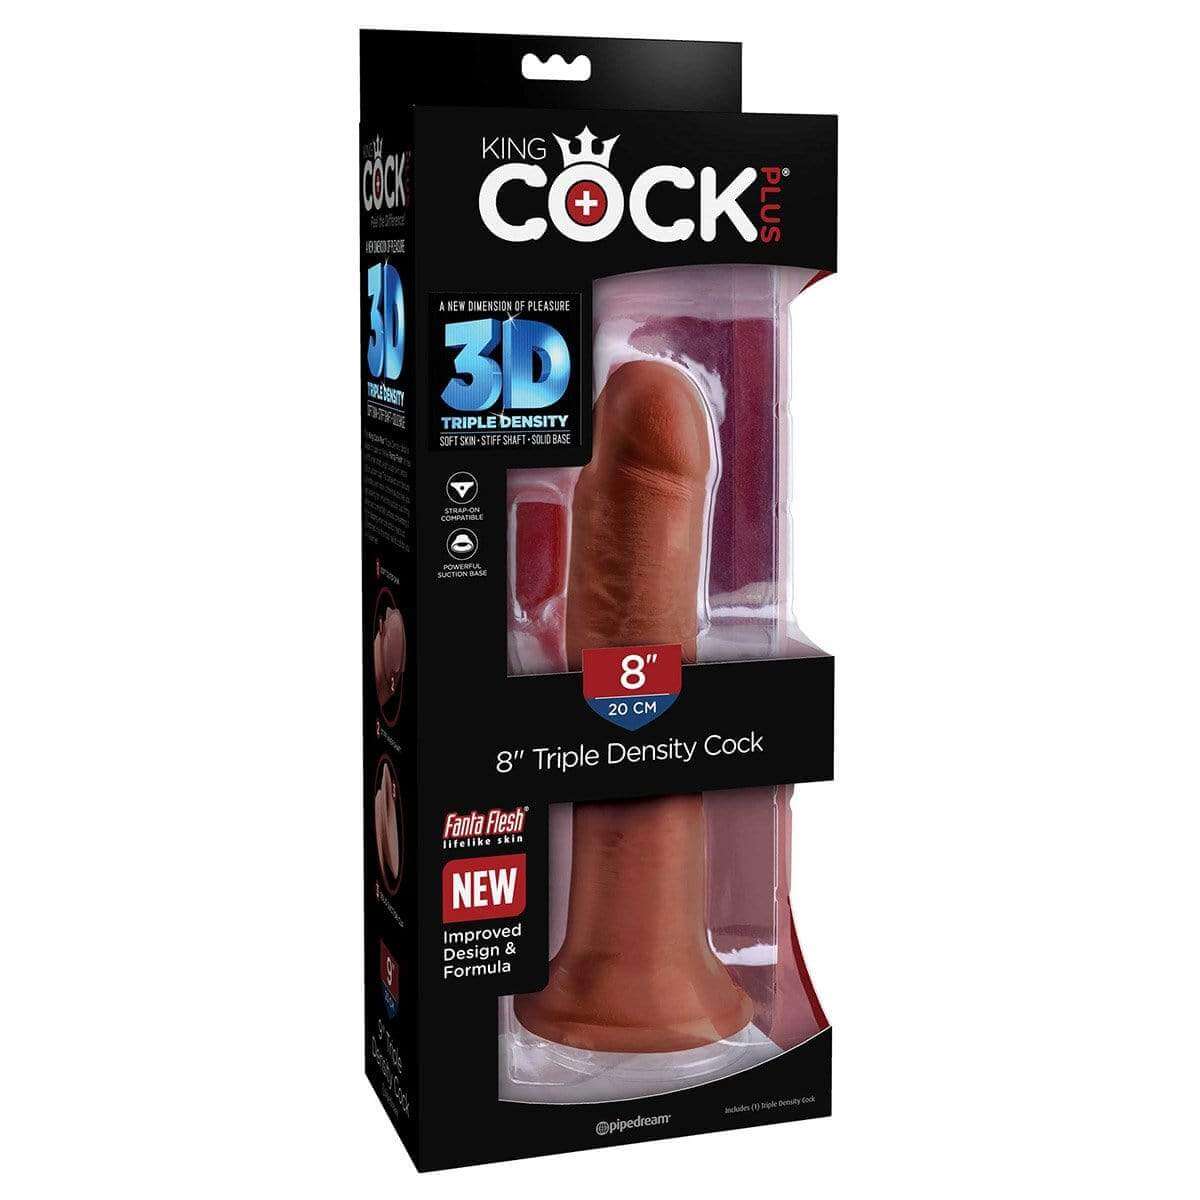 King Cock Plus 8" Triple Density Cock - Brown - Thorn & Feather Sex Toy Canada